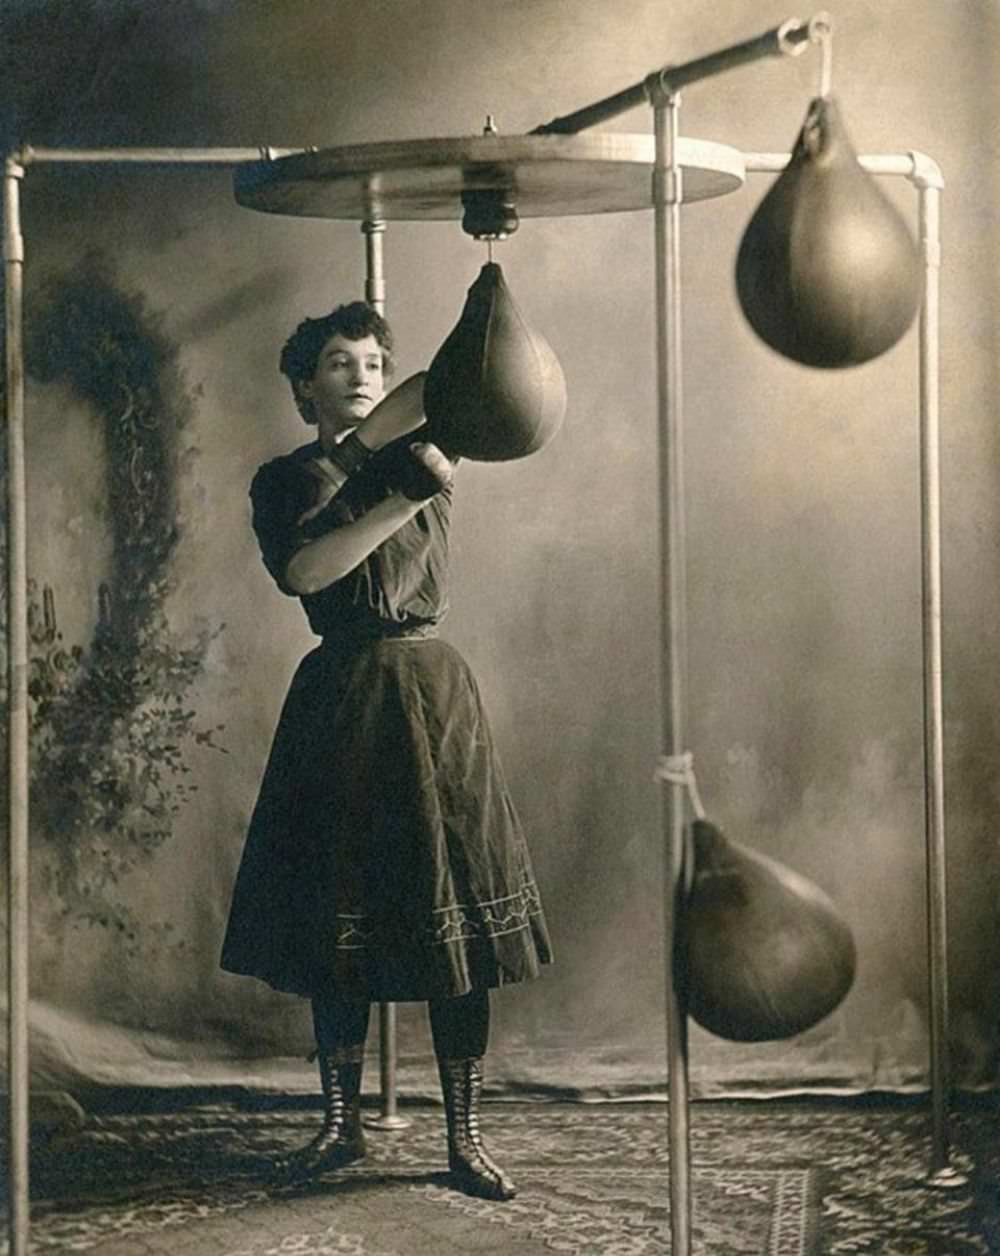 A young woman in a skirt working out with boxing gloves and a punching bag, circa 1890.